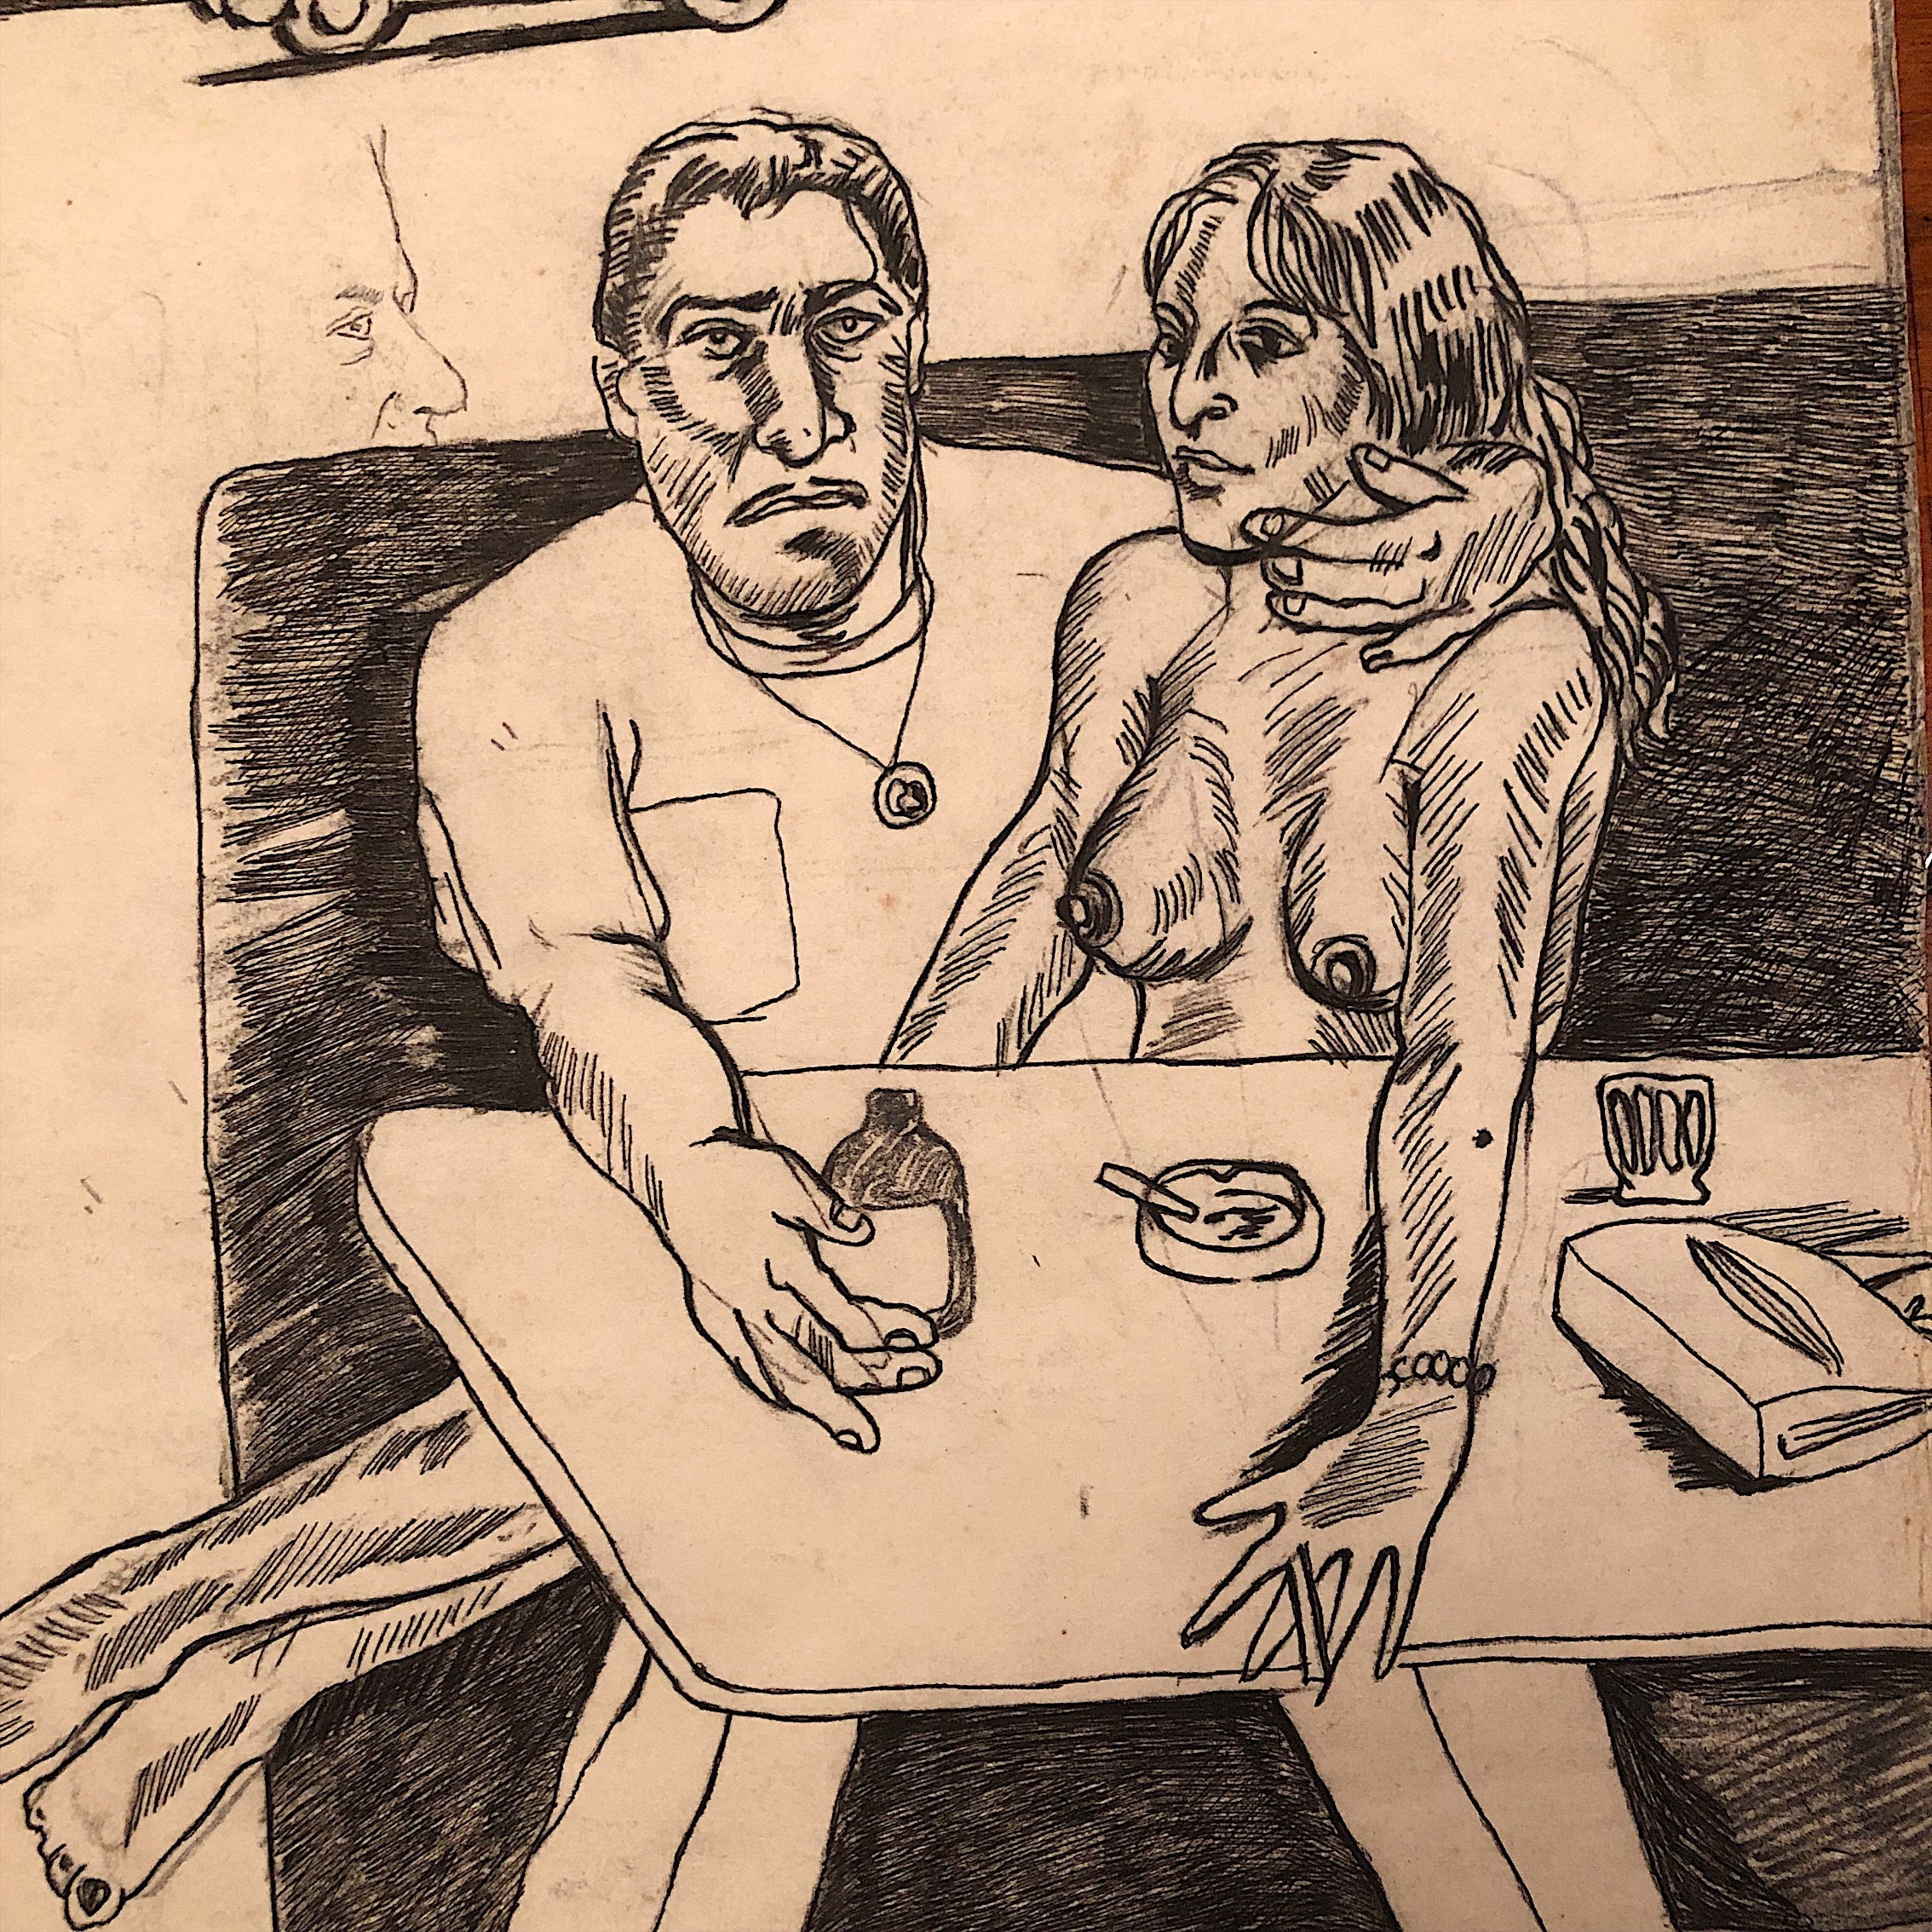 Nude Jose Lozano Artwork from 1980s - Vintage Pop Culture Drawing - Listed California Artist - Pulp Fiction Style Art - AS IS